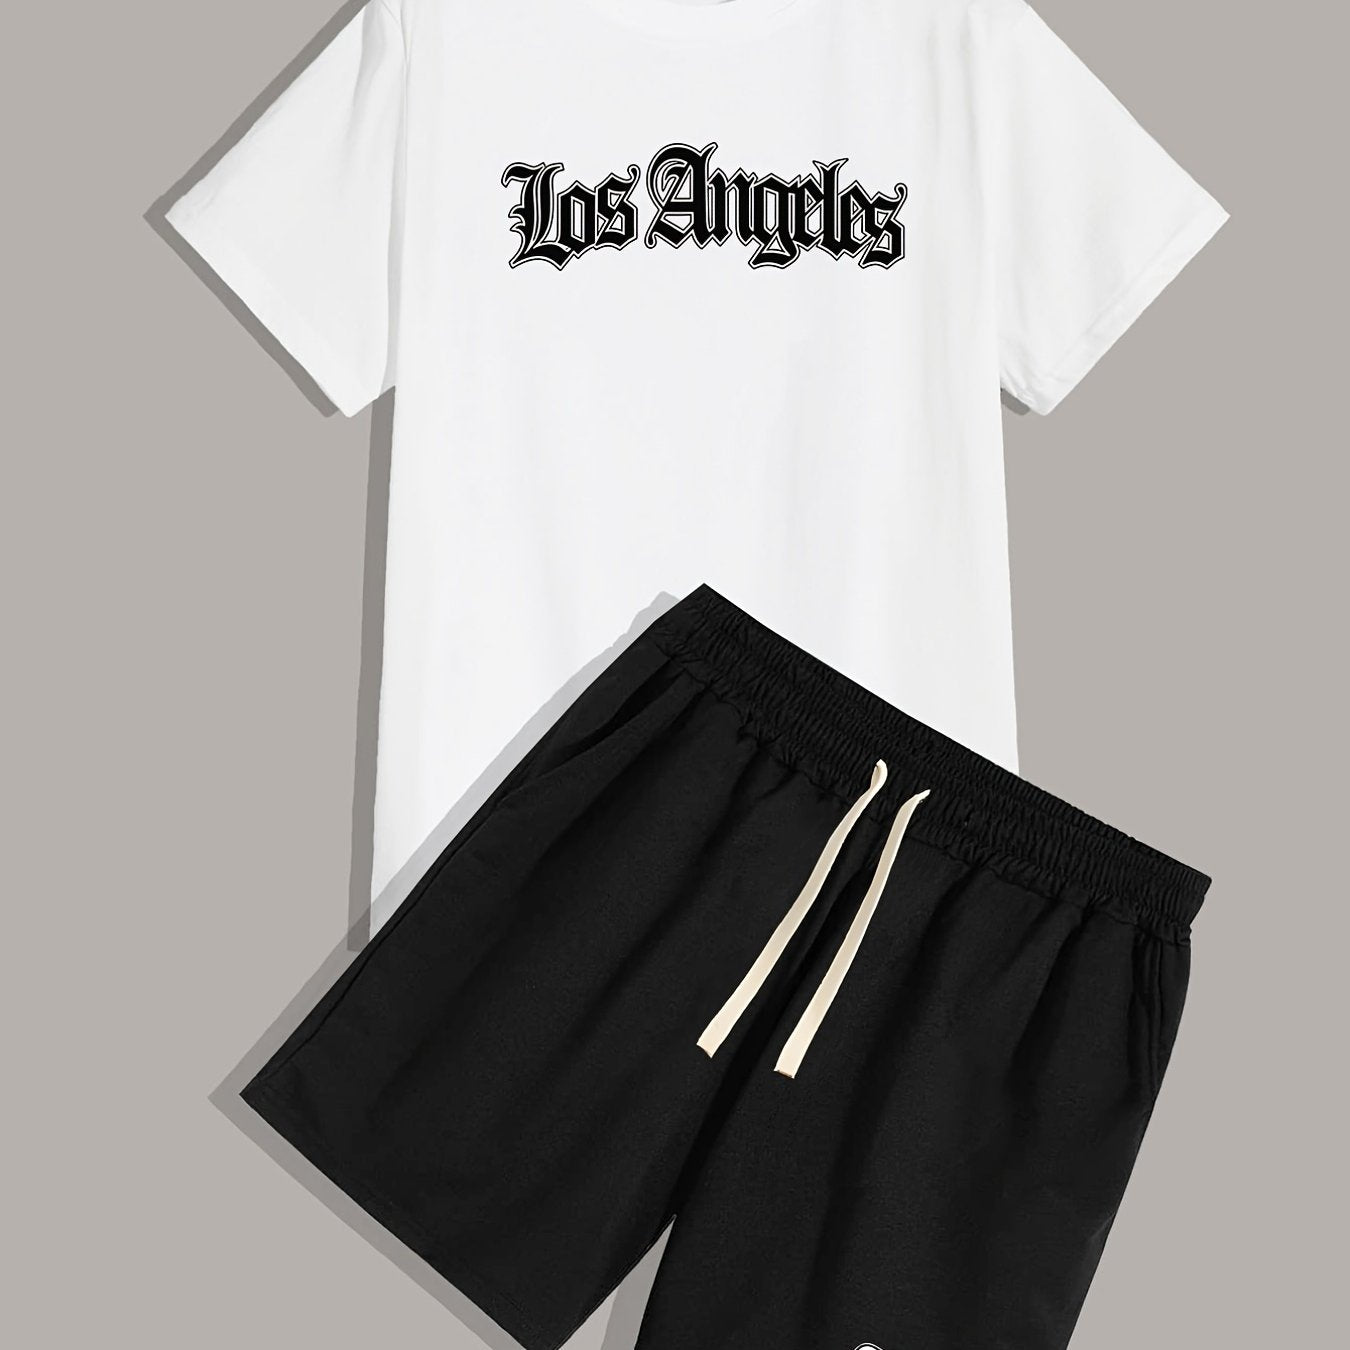 「lovevop」Los Angeles, Men's 2 Pieces Outfits, Round Neck Short Sleeve T-Shirt And Drawstring Shorts Set